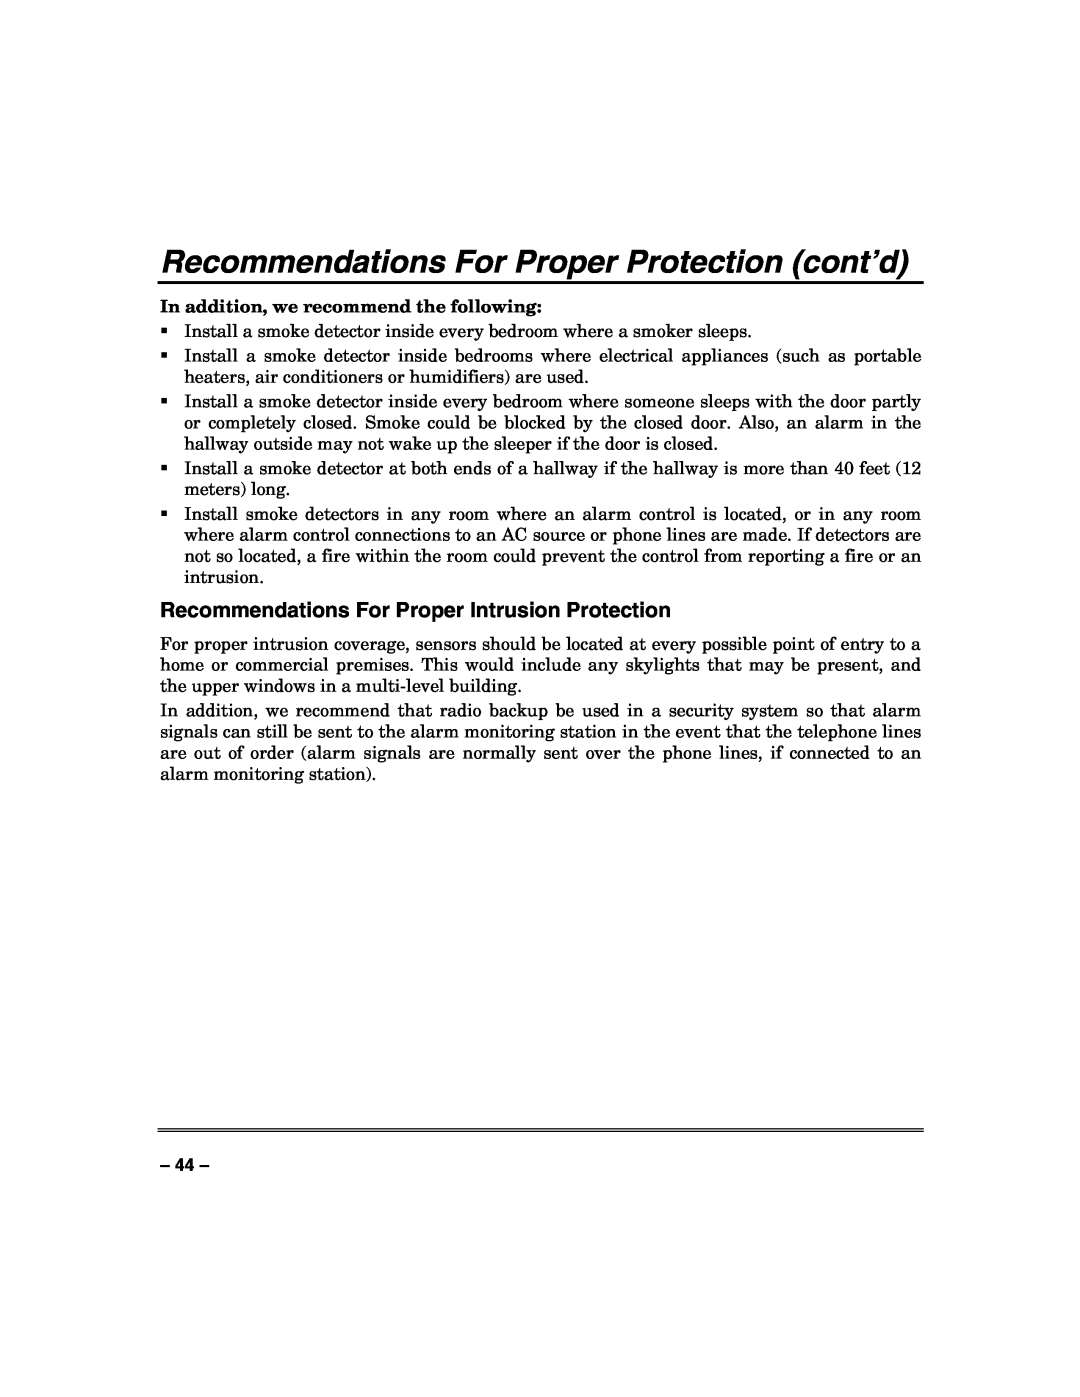 Honeywell N7003V3 manual Recommendations For Proper Protection cont’d, Recommendations For Proper Intrusion Protection 